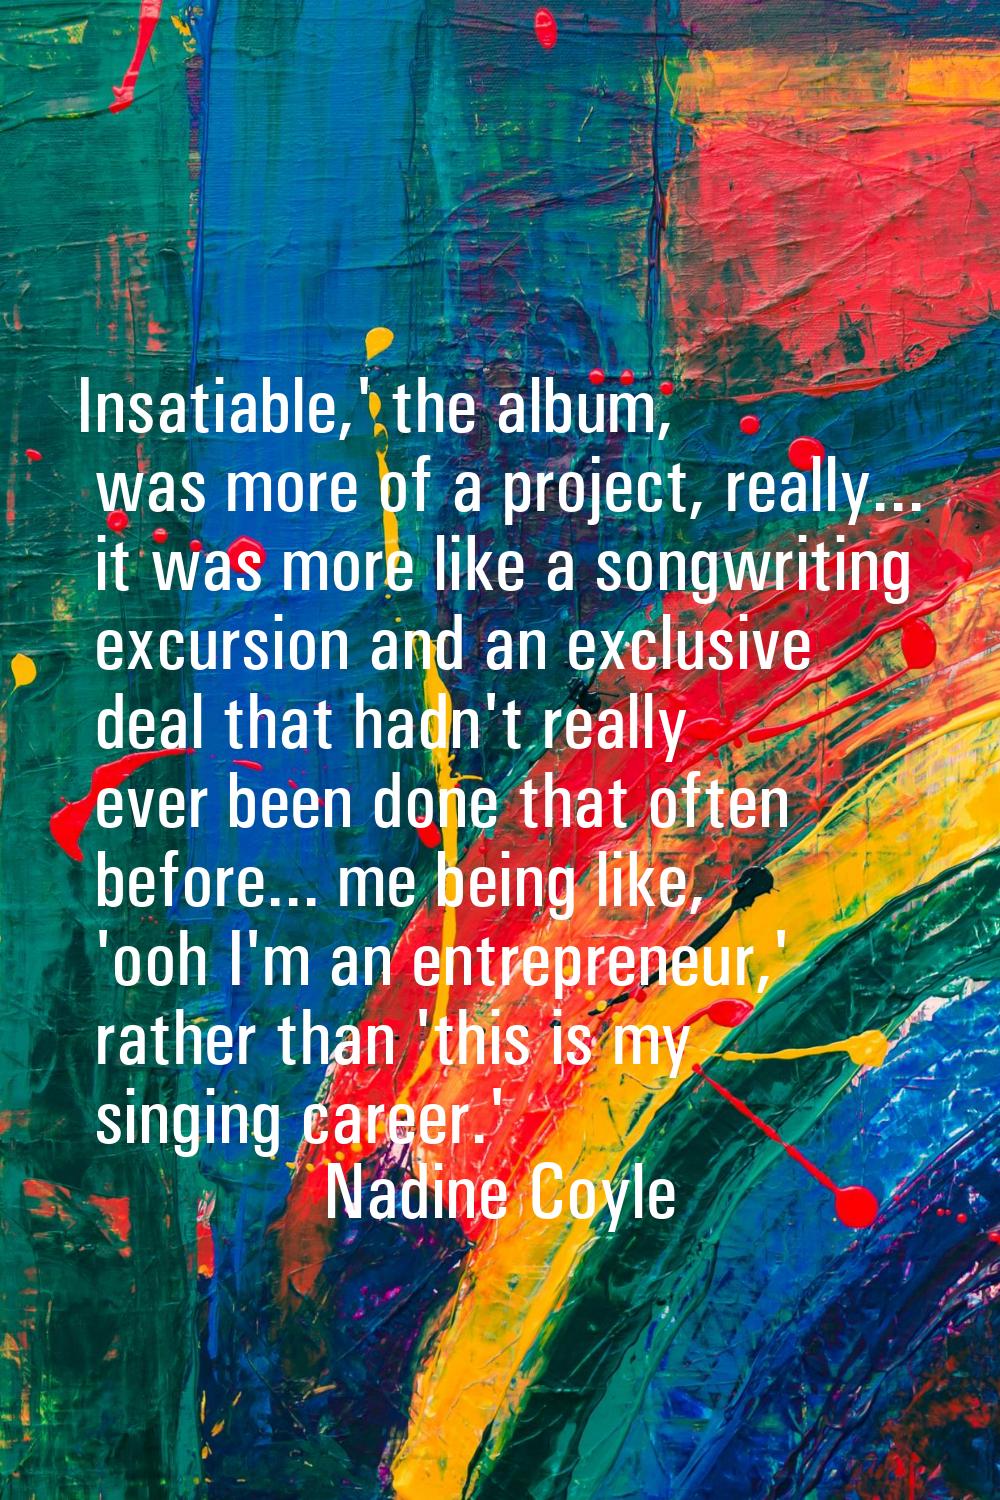 Insatiable,' the album, was more of a project, really... it was more like a songwriting excursion a